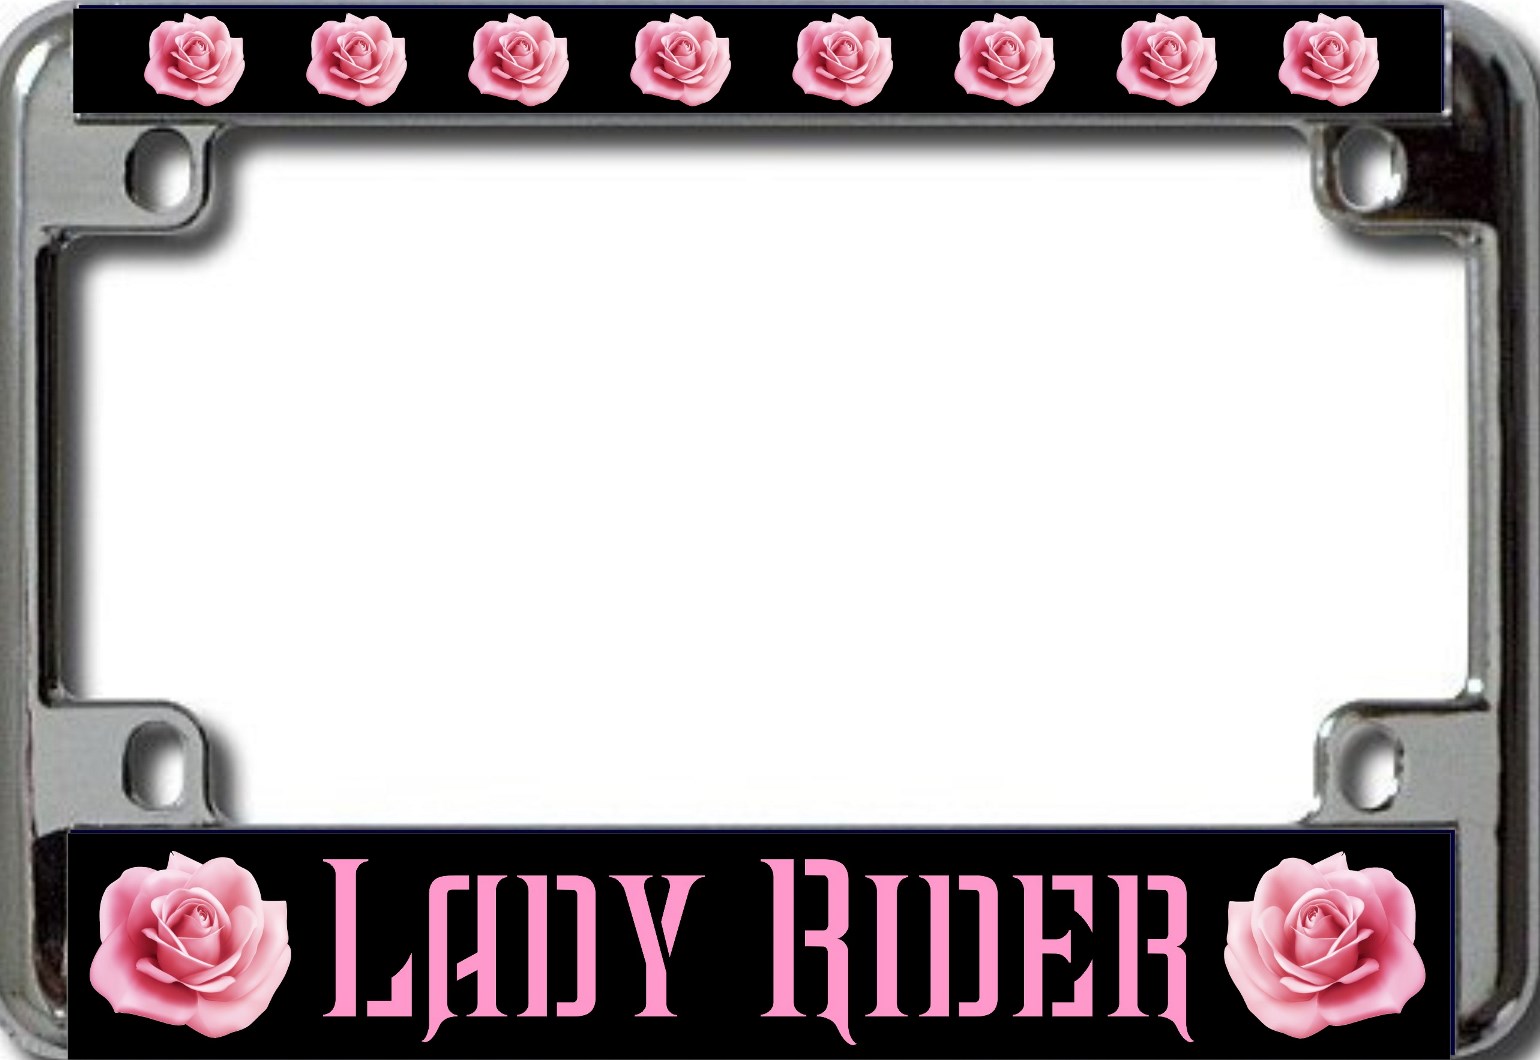 Pink Rose Lady Rider Motorcycle License Plate FRAME